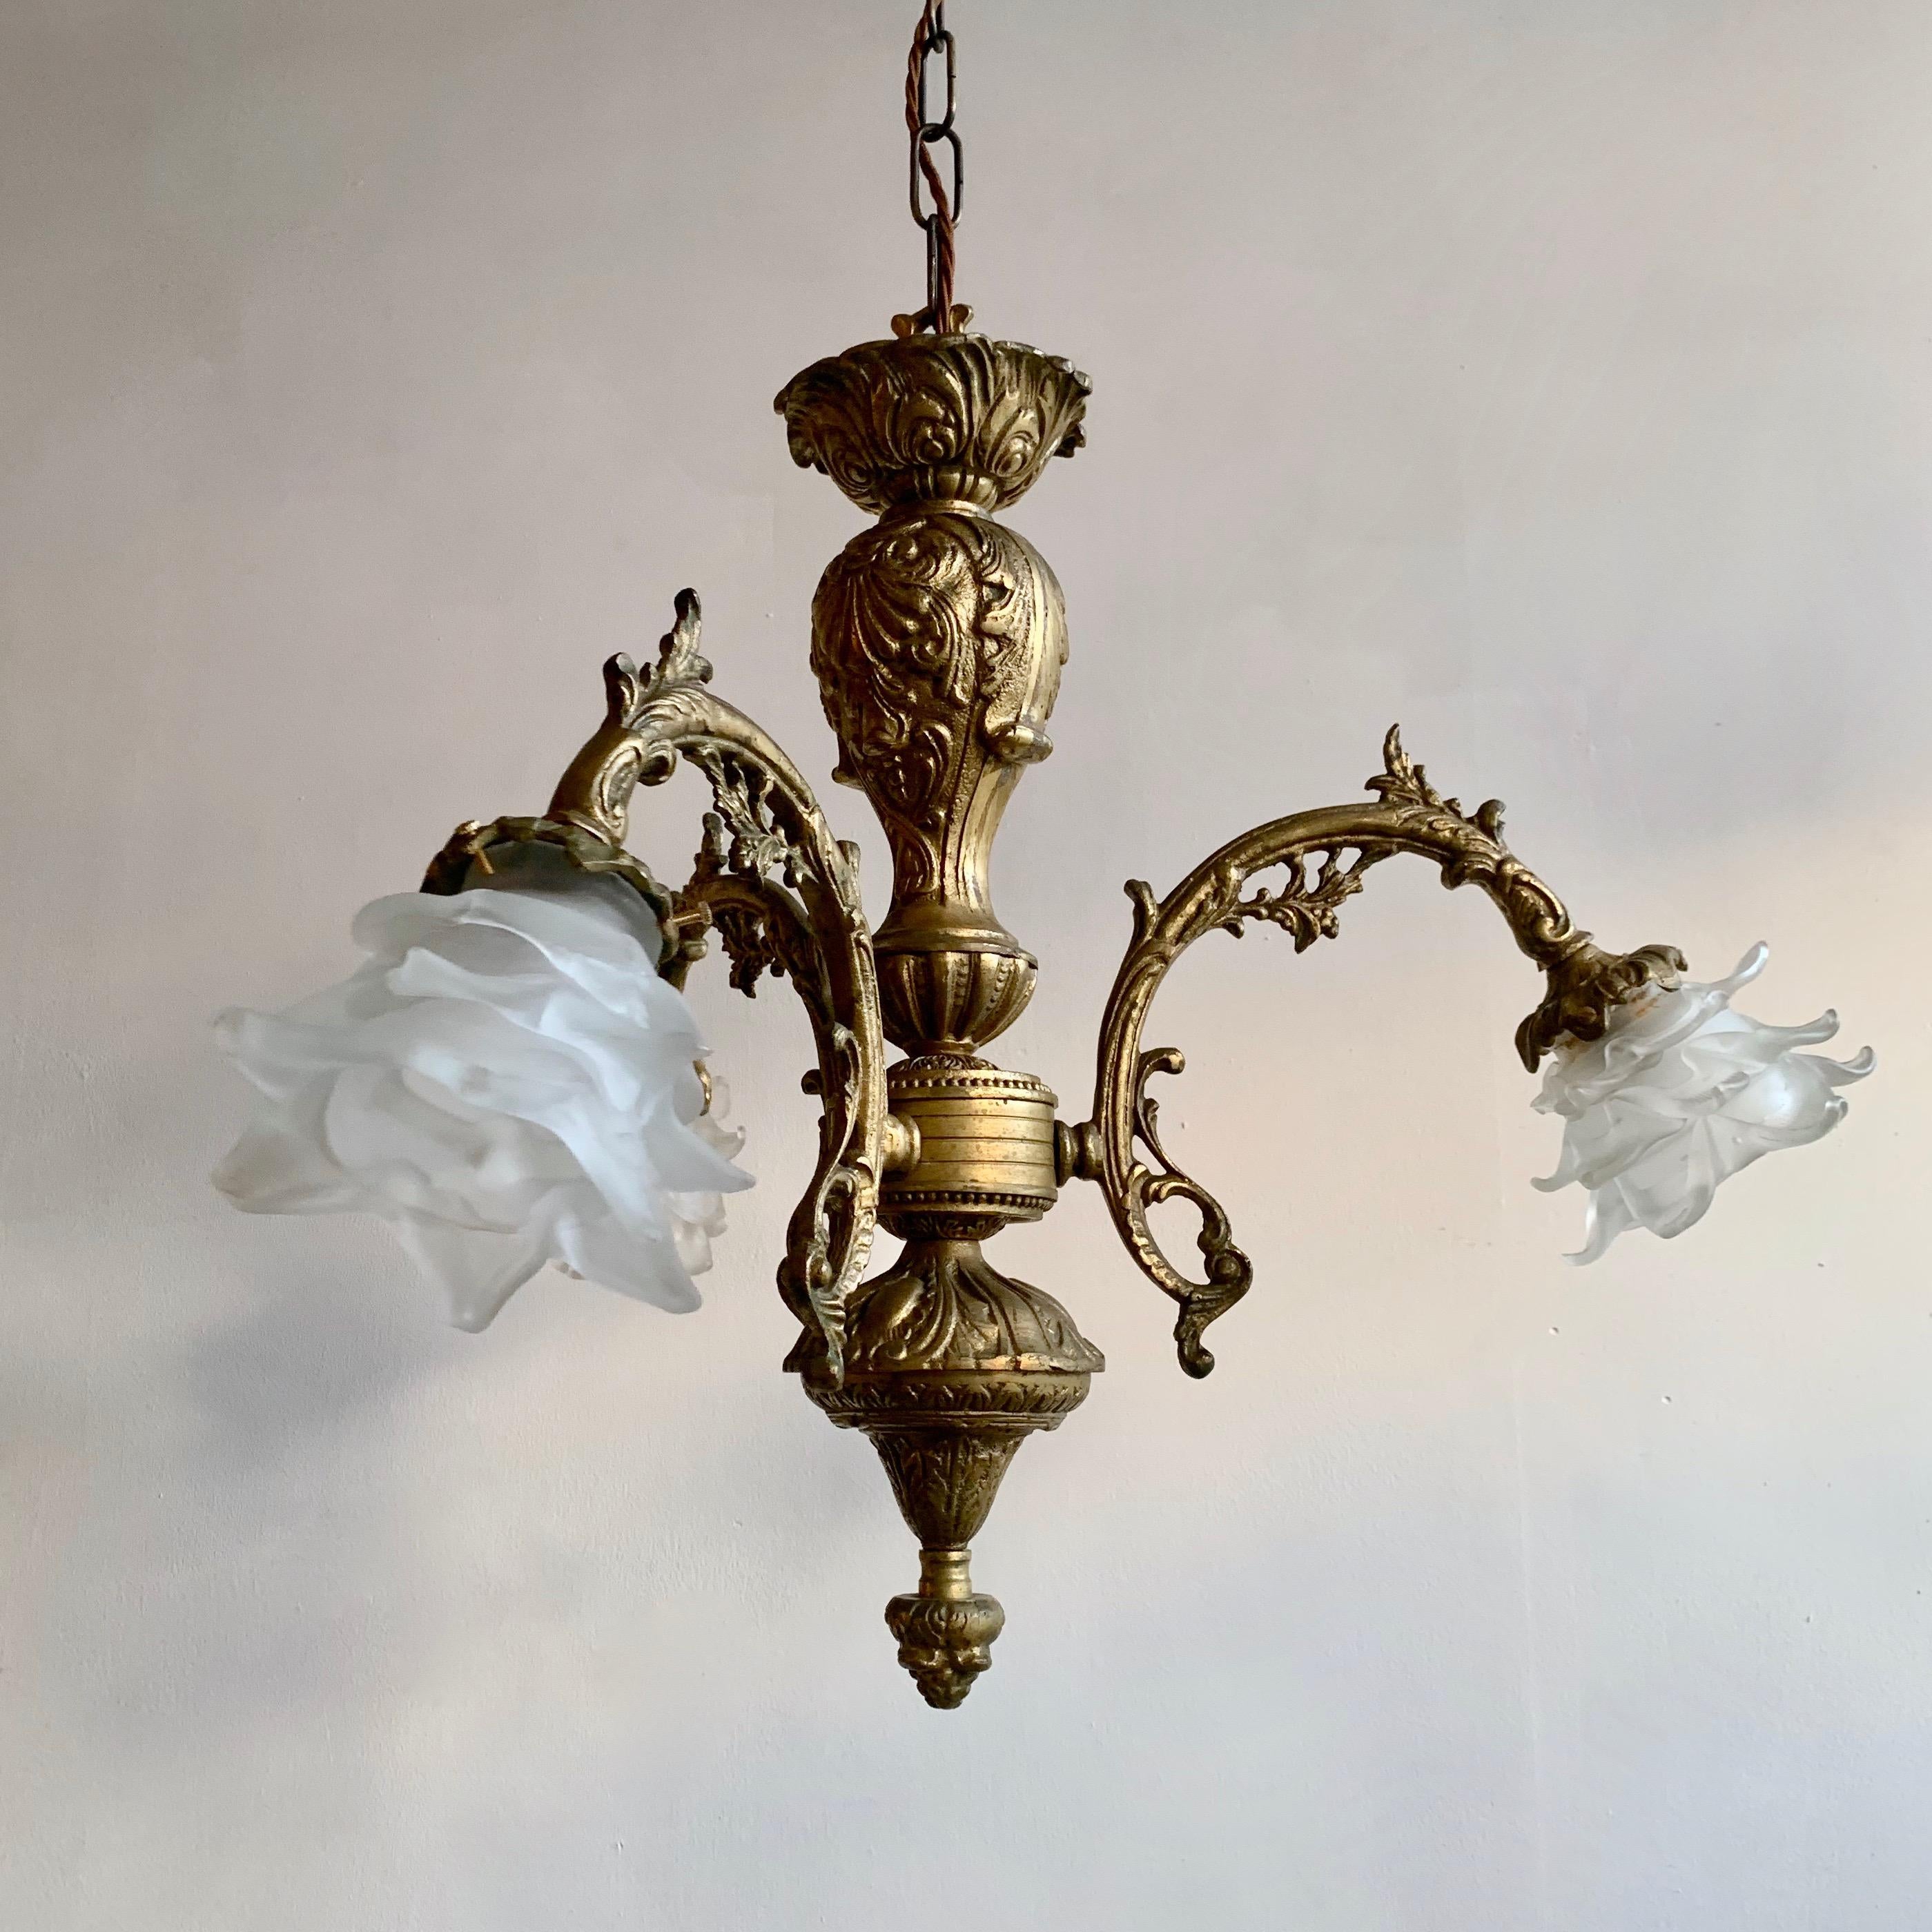 The chandelier comes supplied with braided flex, chain, a ceiling rose and a chandelier hook plate. Chandelier requires SES lamps, these are not included.

This chandelier has been fully restored and rewired here, in Stockport, near Manchester by